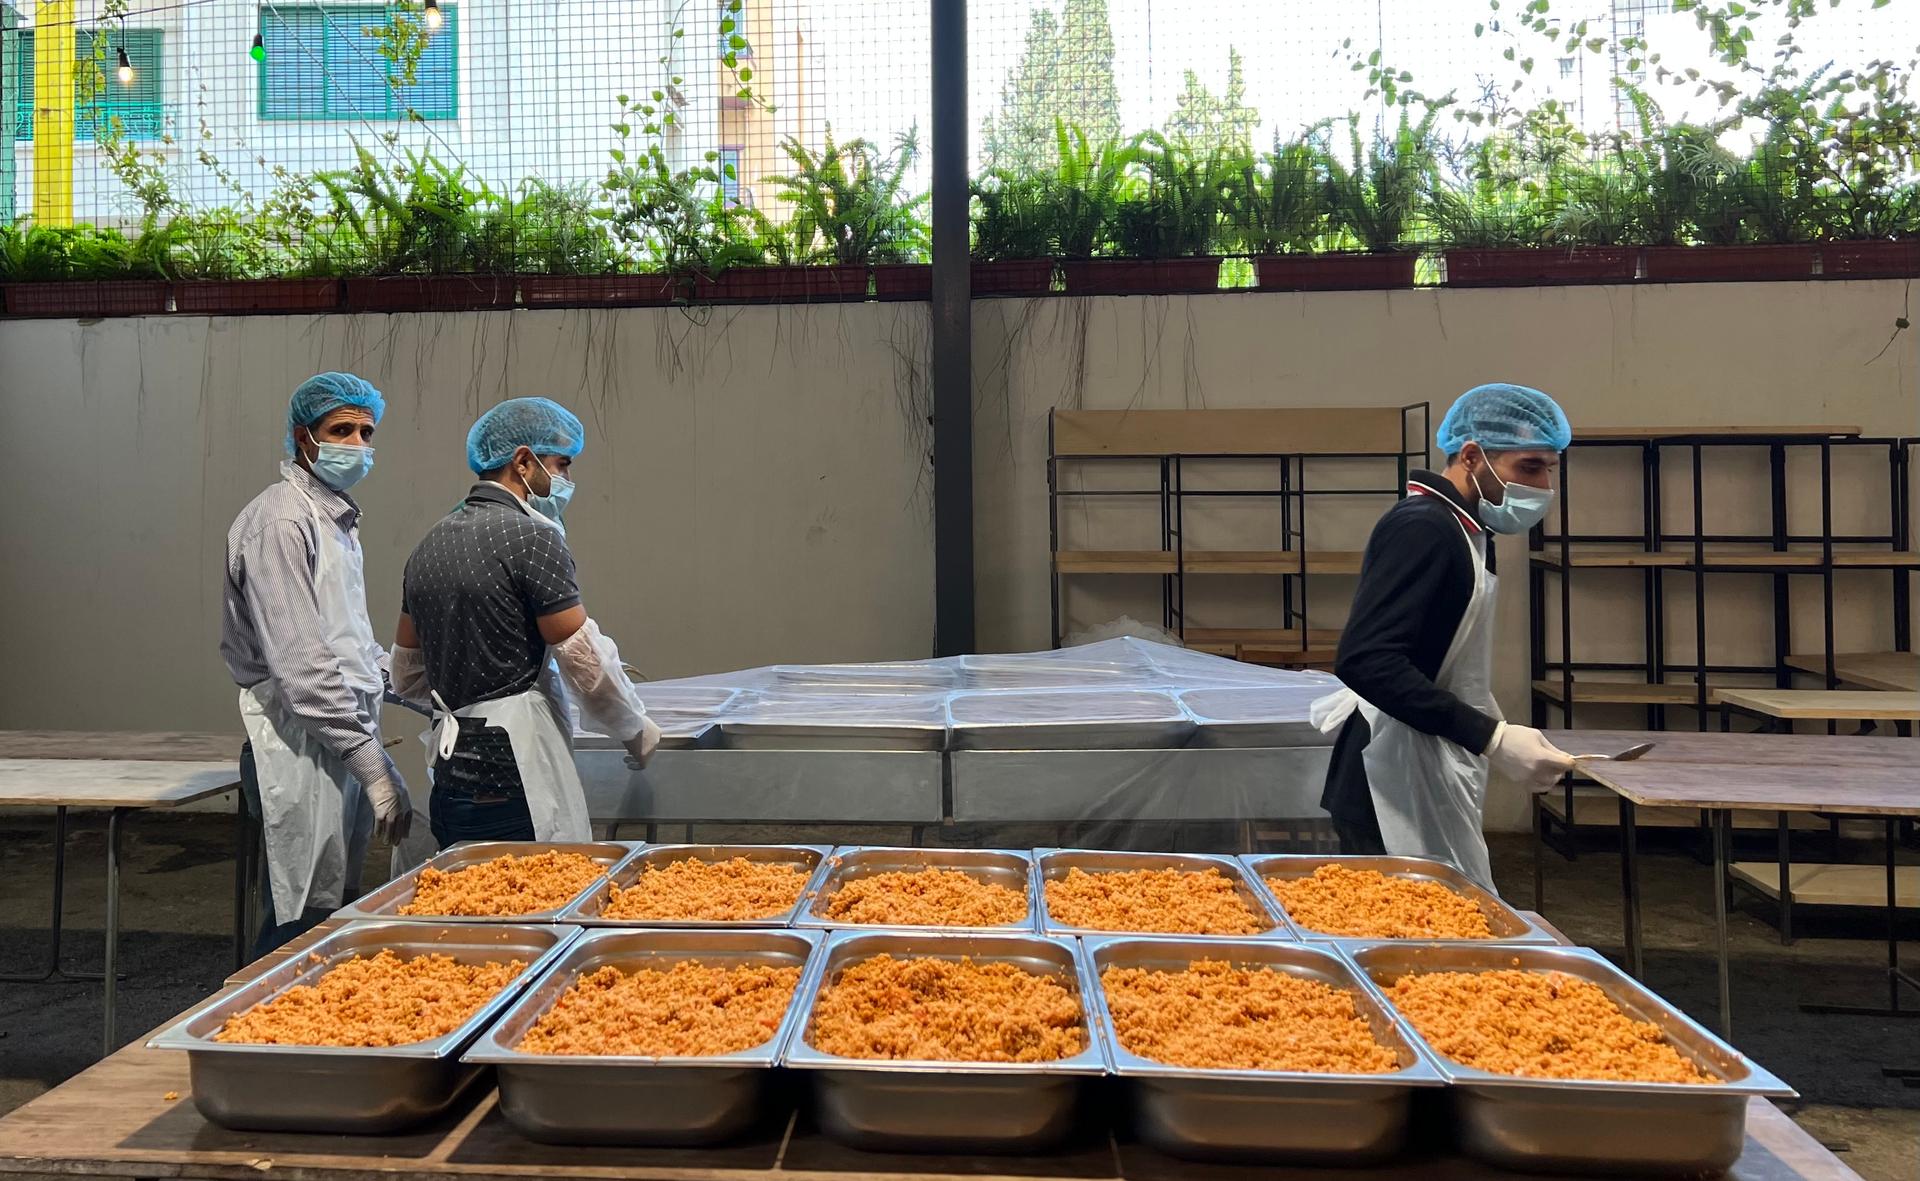 Workers at the Matbakh El Kell Community Kitchen in Beirut prepare food for distribution.